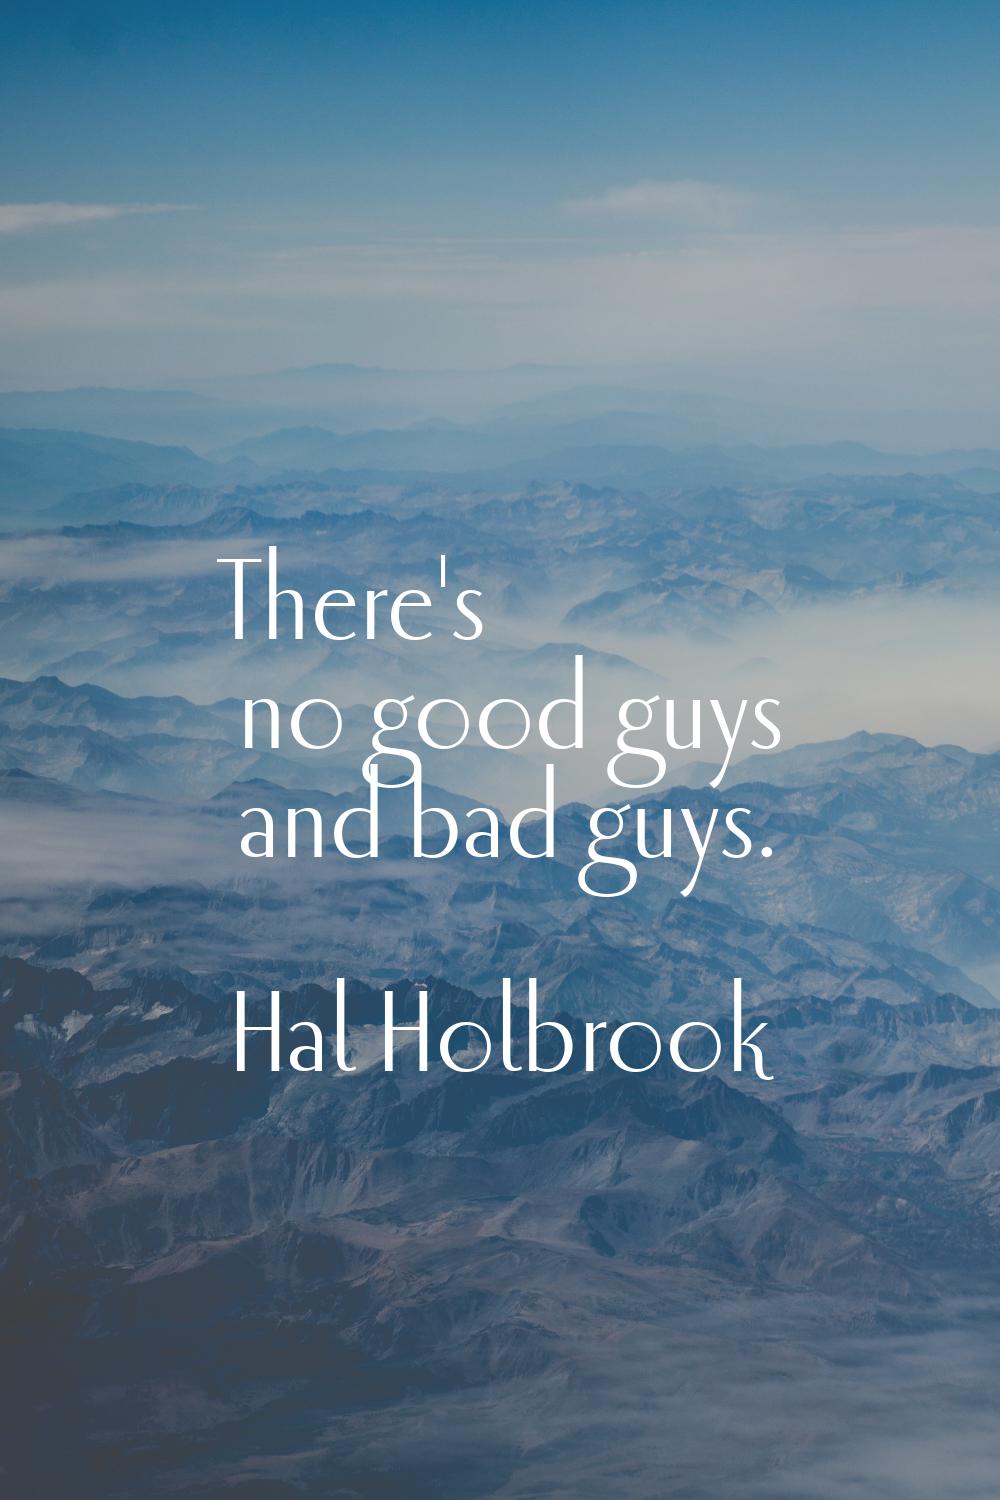 There's no good guys and bad guys.